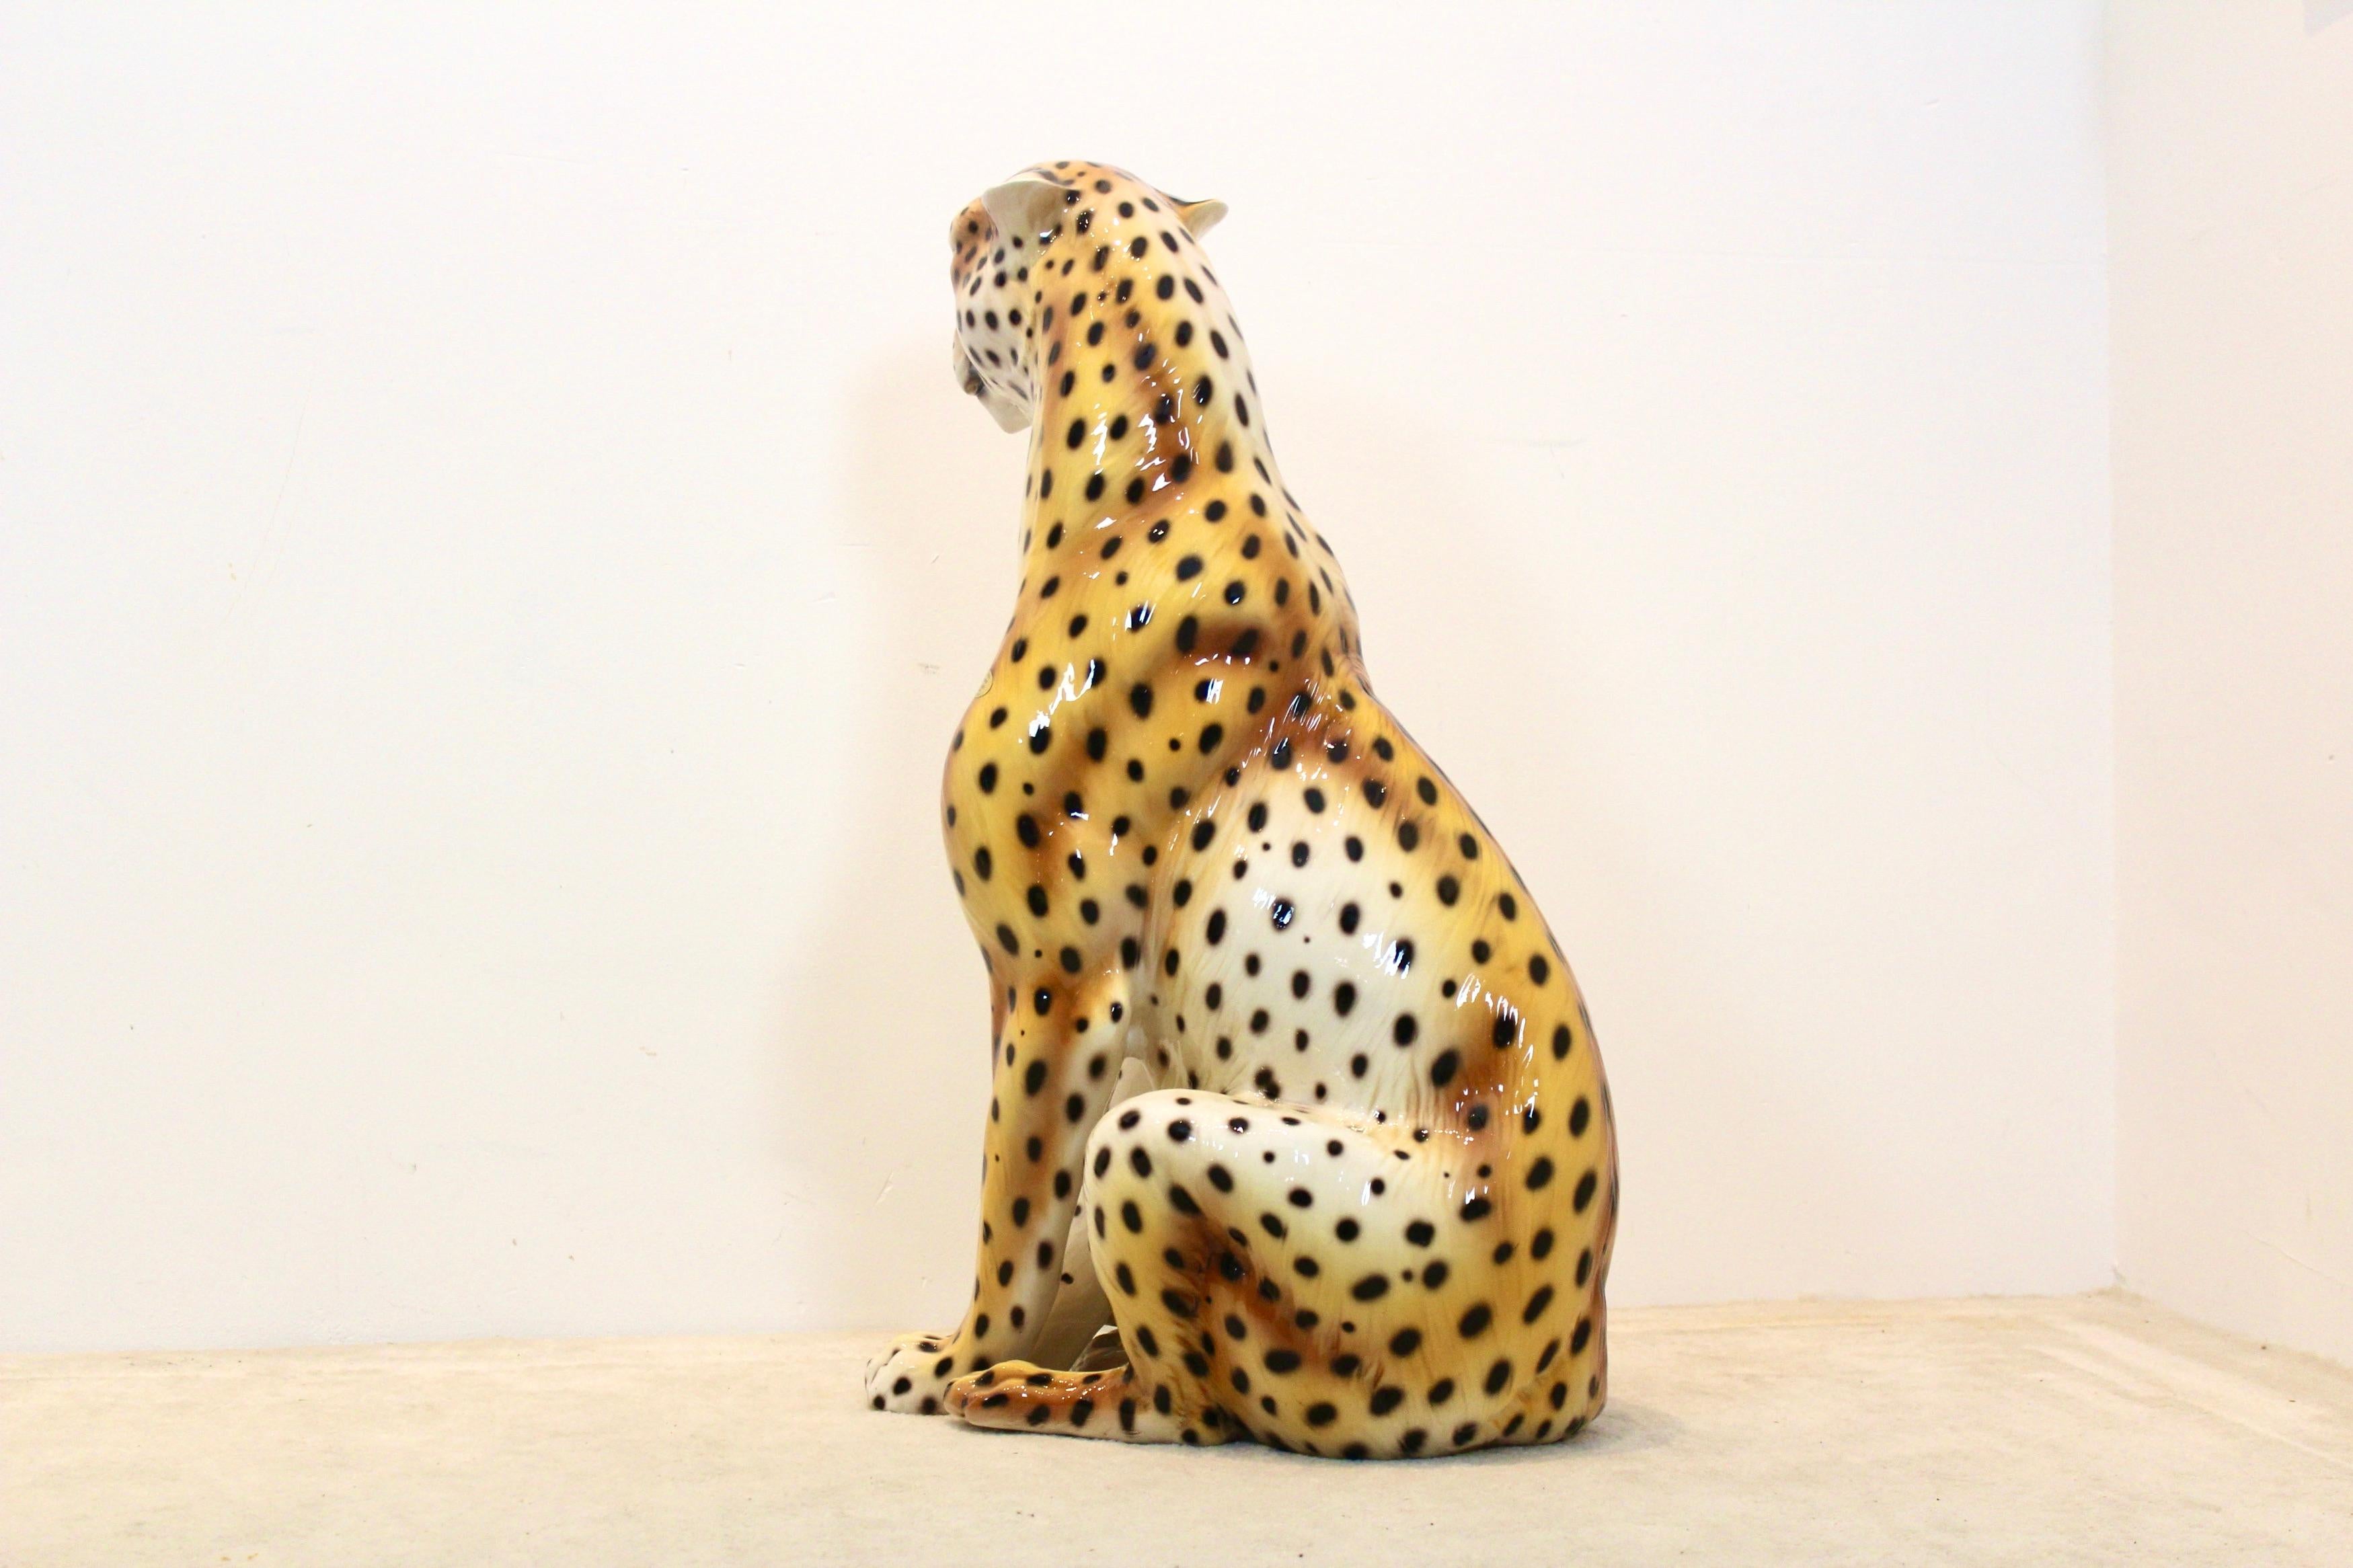 A Stunning and beautiful hand painted ceramic Leopard sculpture made in Italy. This Leopard is in Excellent condition and marked. This is quite a large (life-size) Leopard which makes it a very nice decoration object. Comes with very nice details a